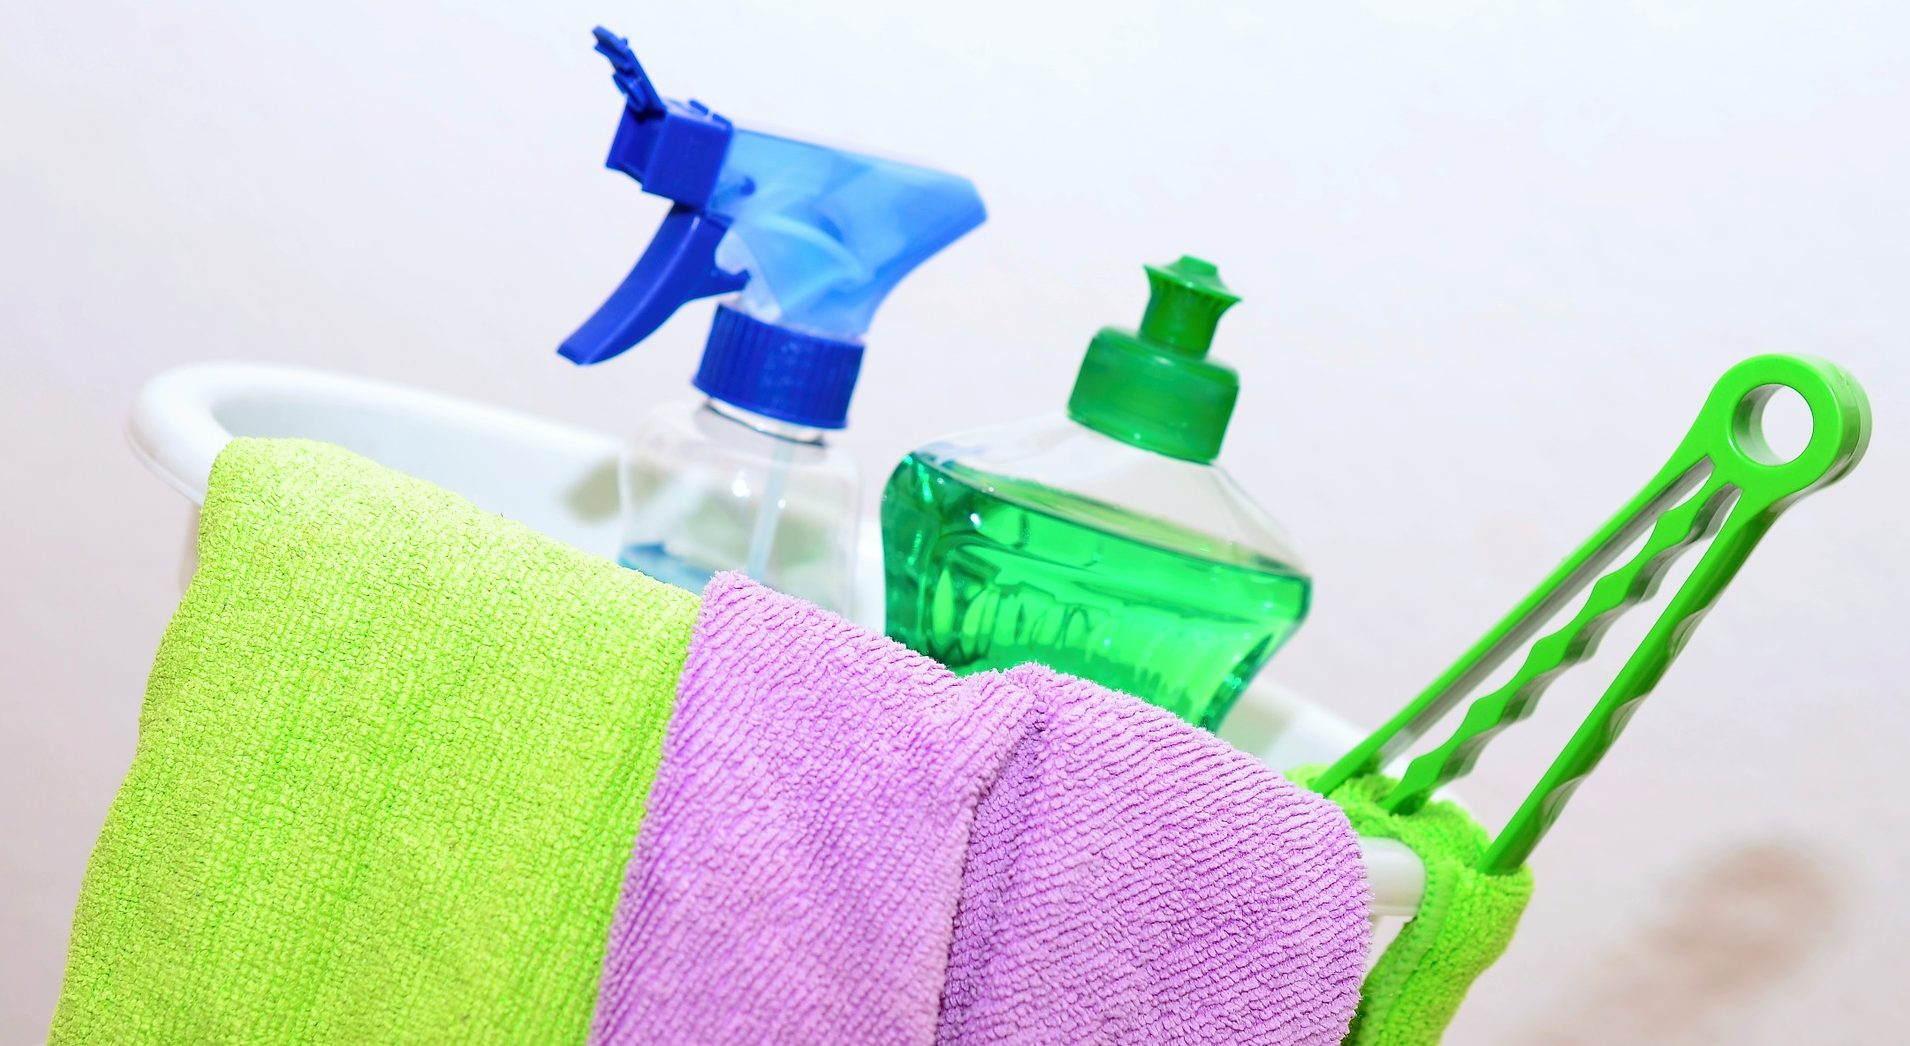 Do you mix chlorine with other cleaning products? Doing so is dangerous